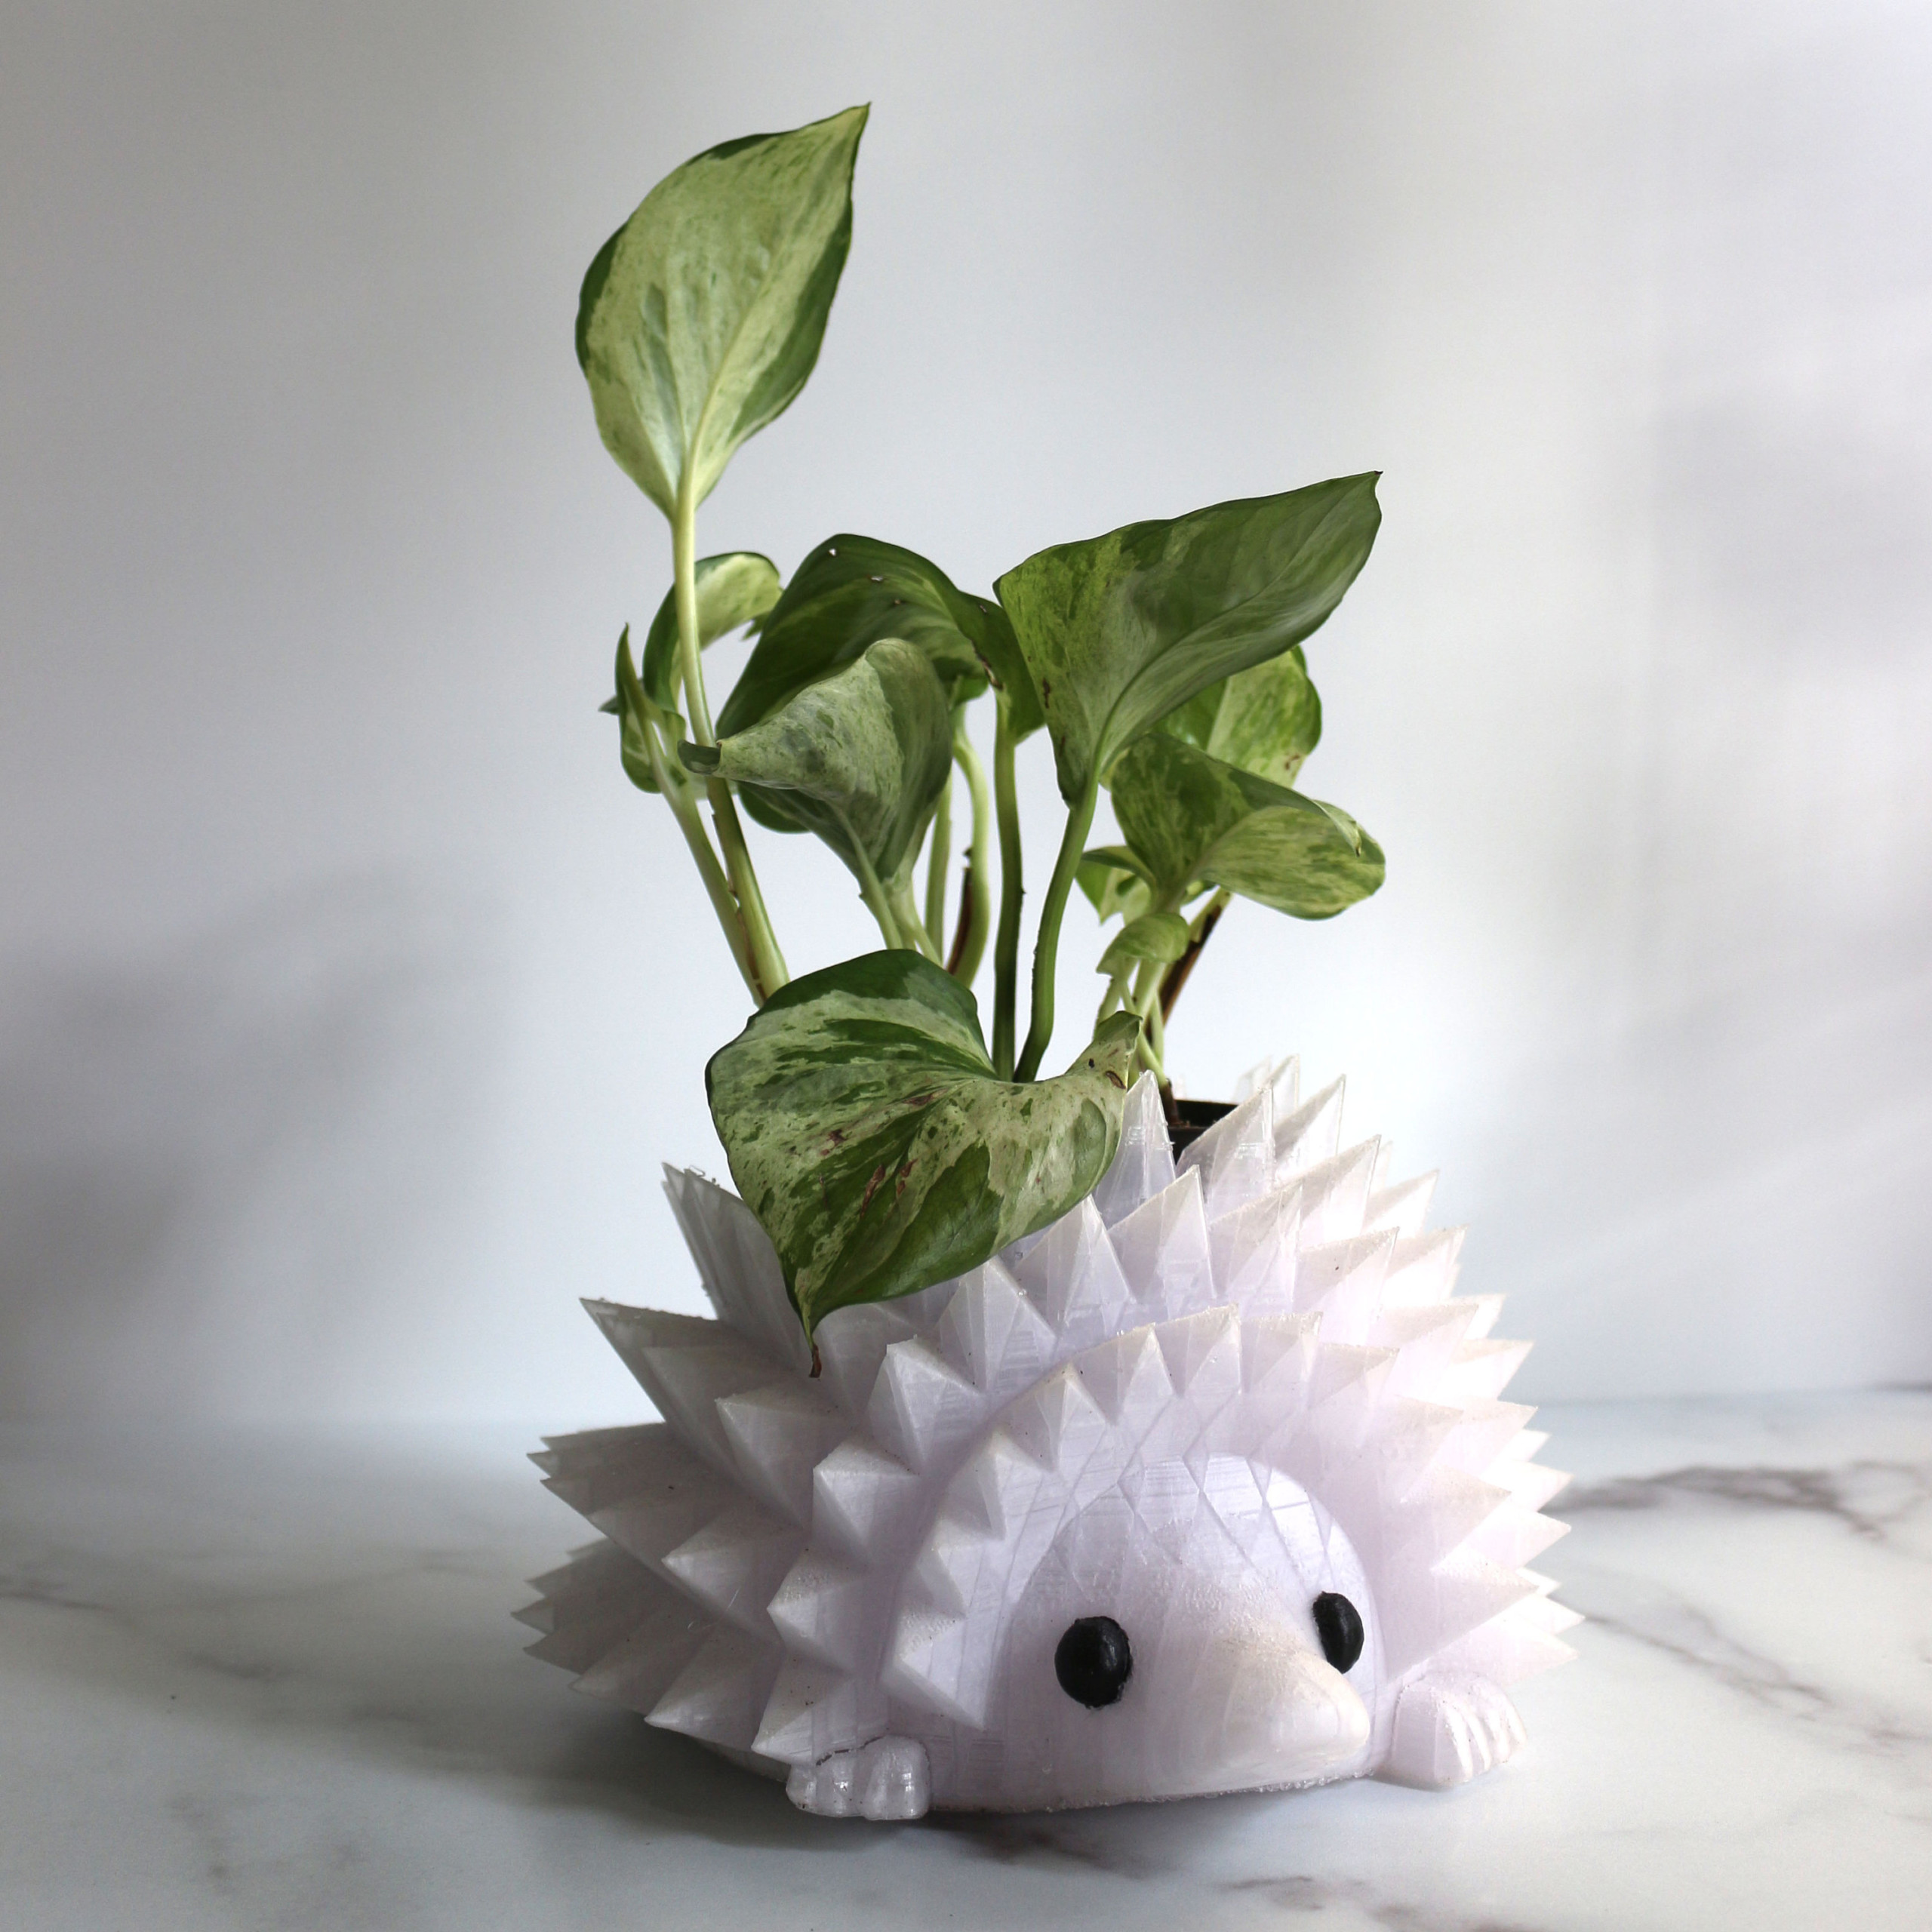 Paint Your Own Ceramic Keepsake The Ginormous Hedgehog Planter 